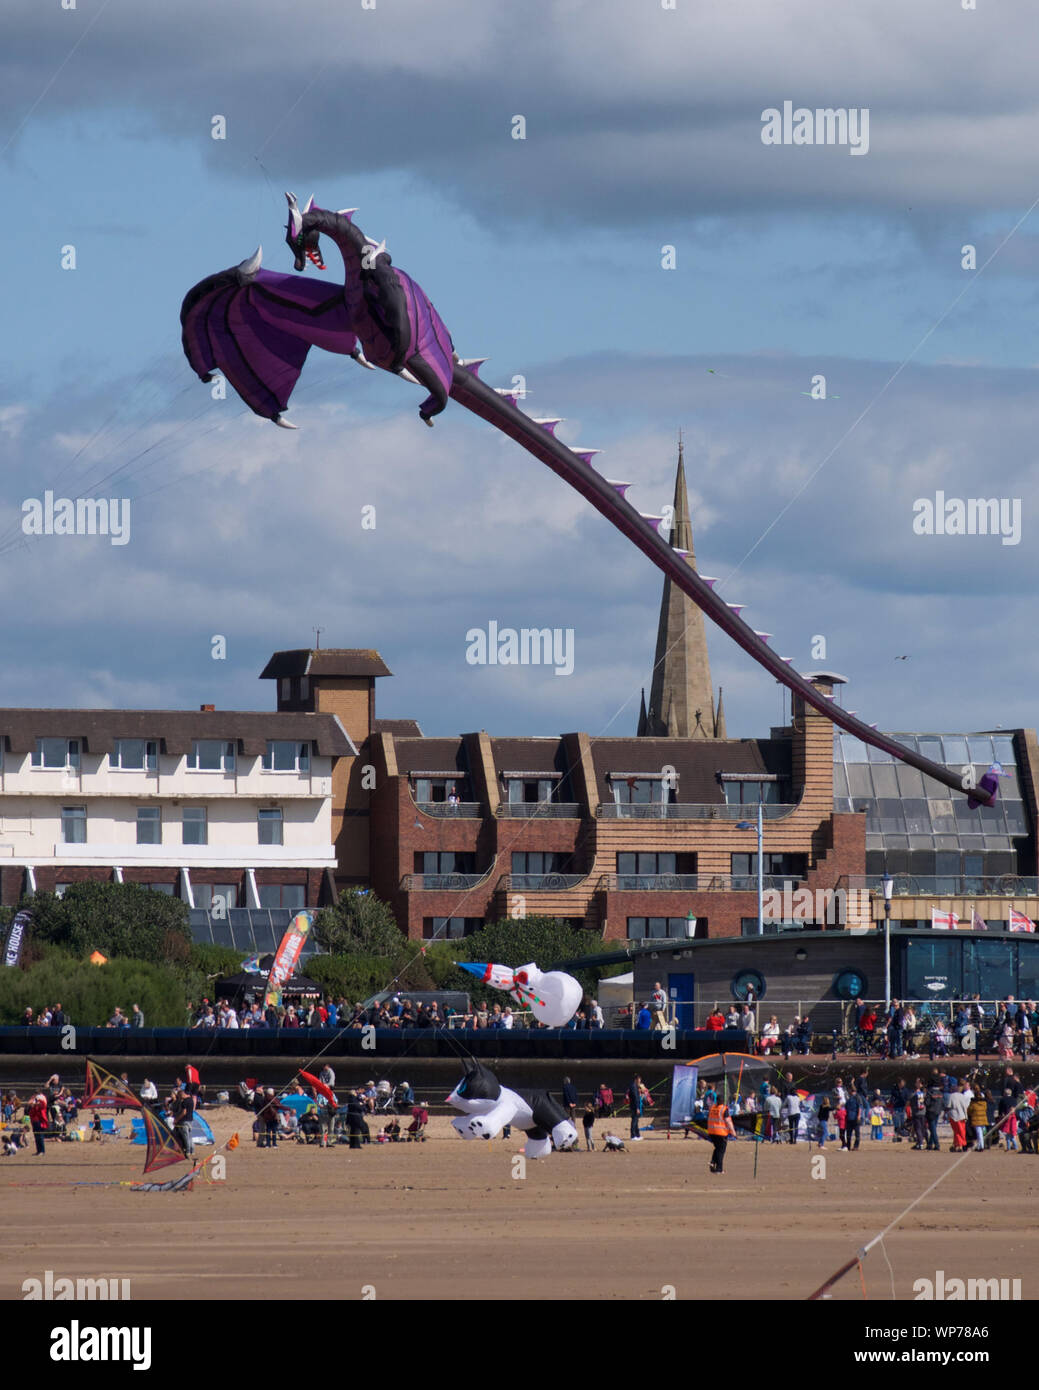 This Game of Thrones dragon was just one of hundresds of kites at the St. Annes International Kite Festival on England's Lancashire coast. Stock Photo